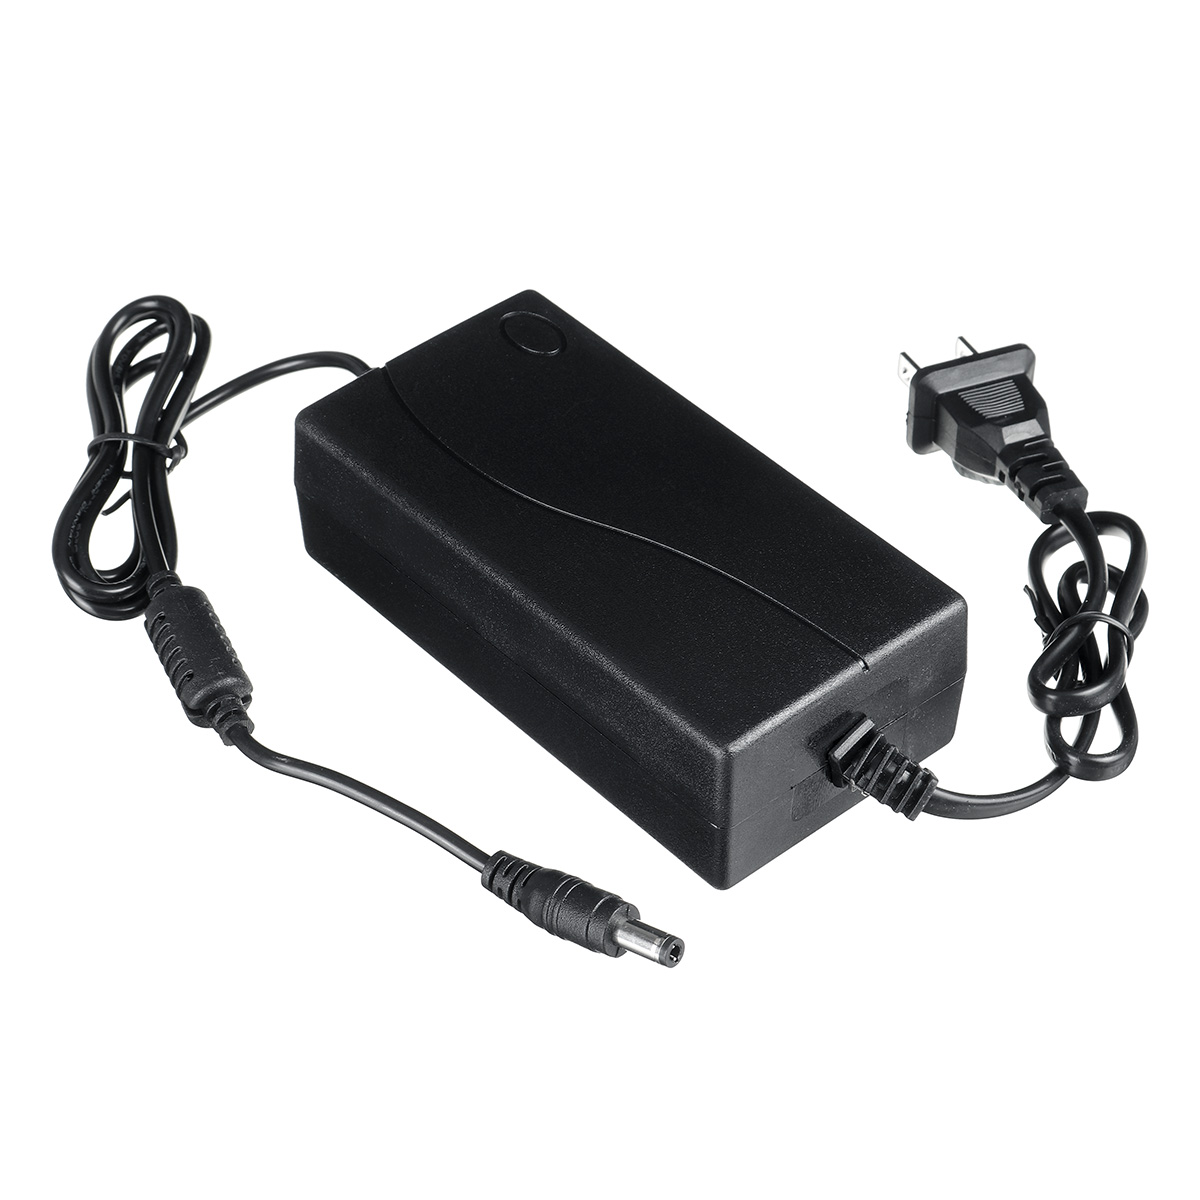 100-240V-6A-Power-Cord-Adapter-50--60HZ-Power-Cable-Adapter-Laptop-Charger-1790400-4